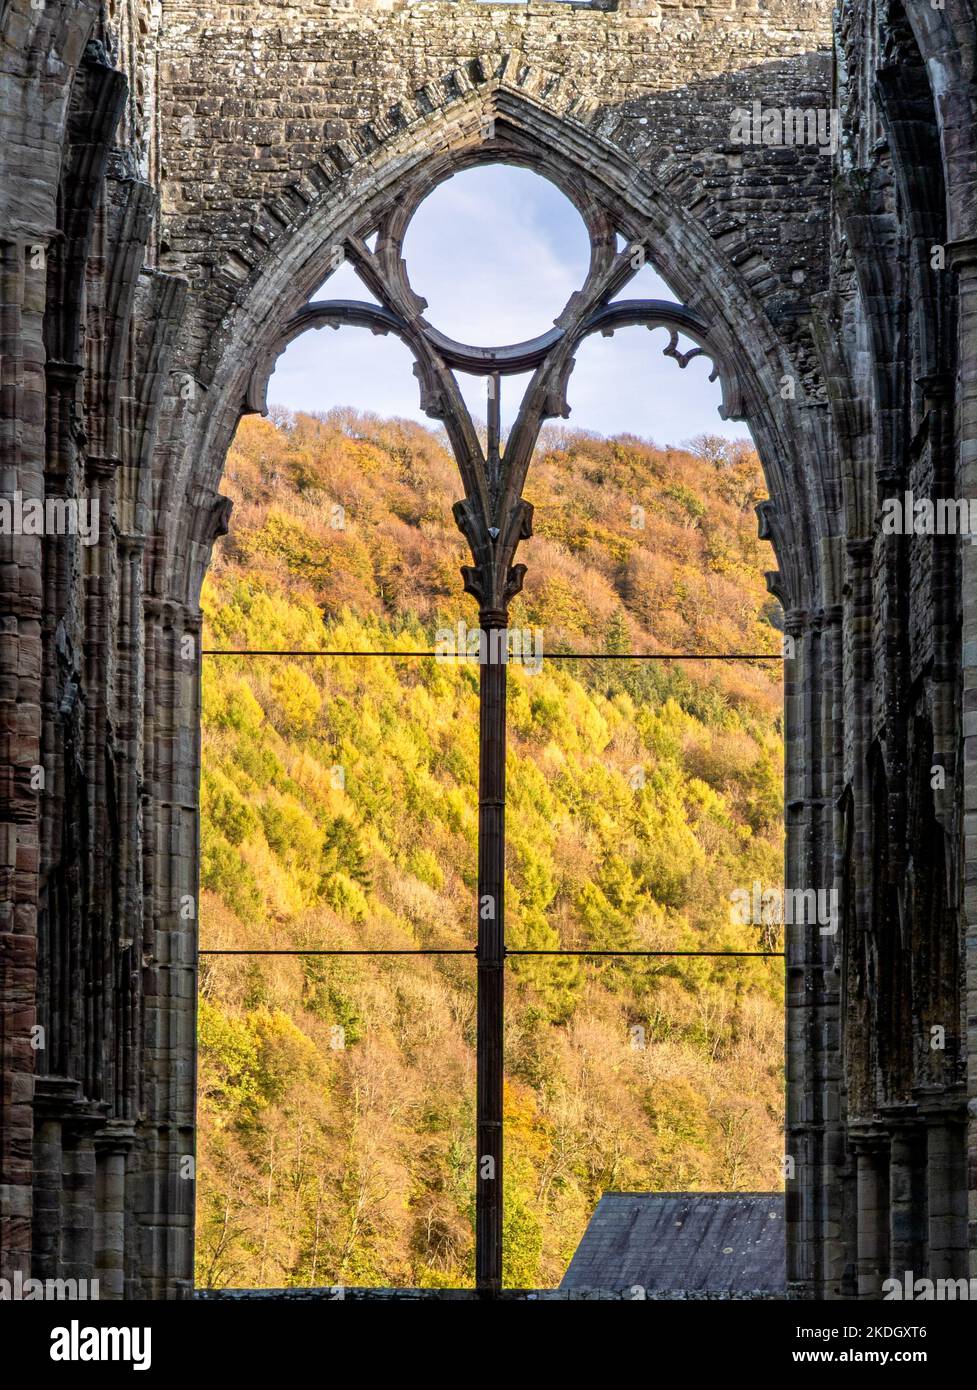 Ruins of an ancient 12th century monastery in the autumn (Tintern Abbey, Wales) Stock Photo